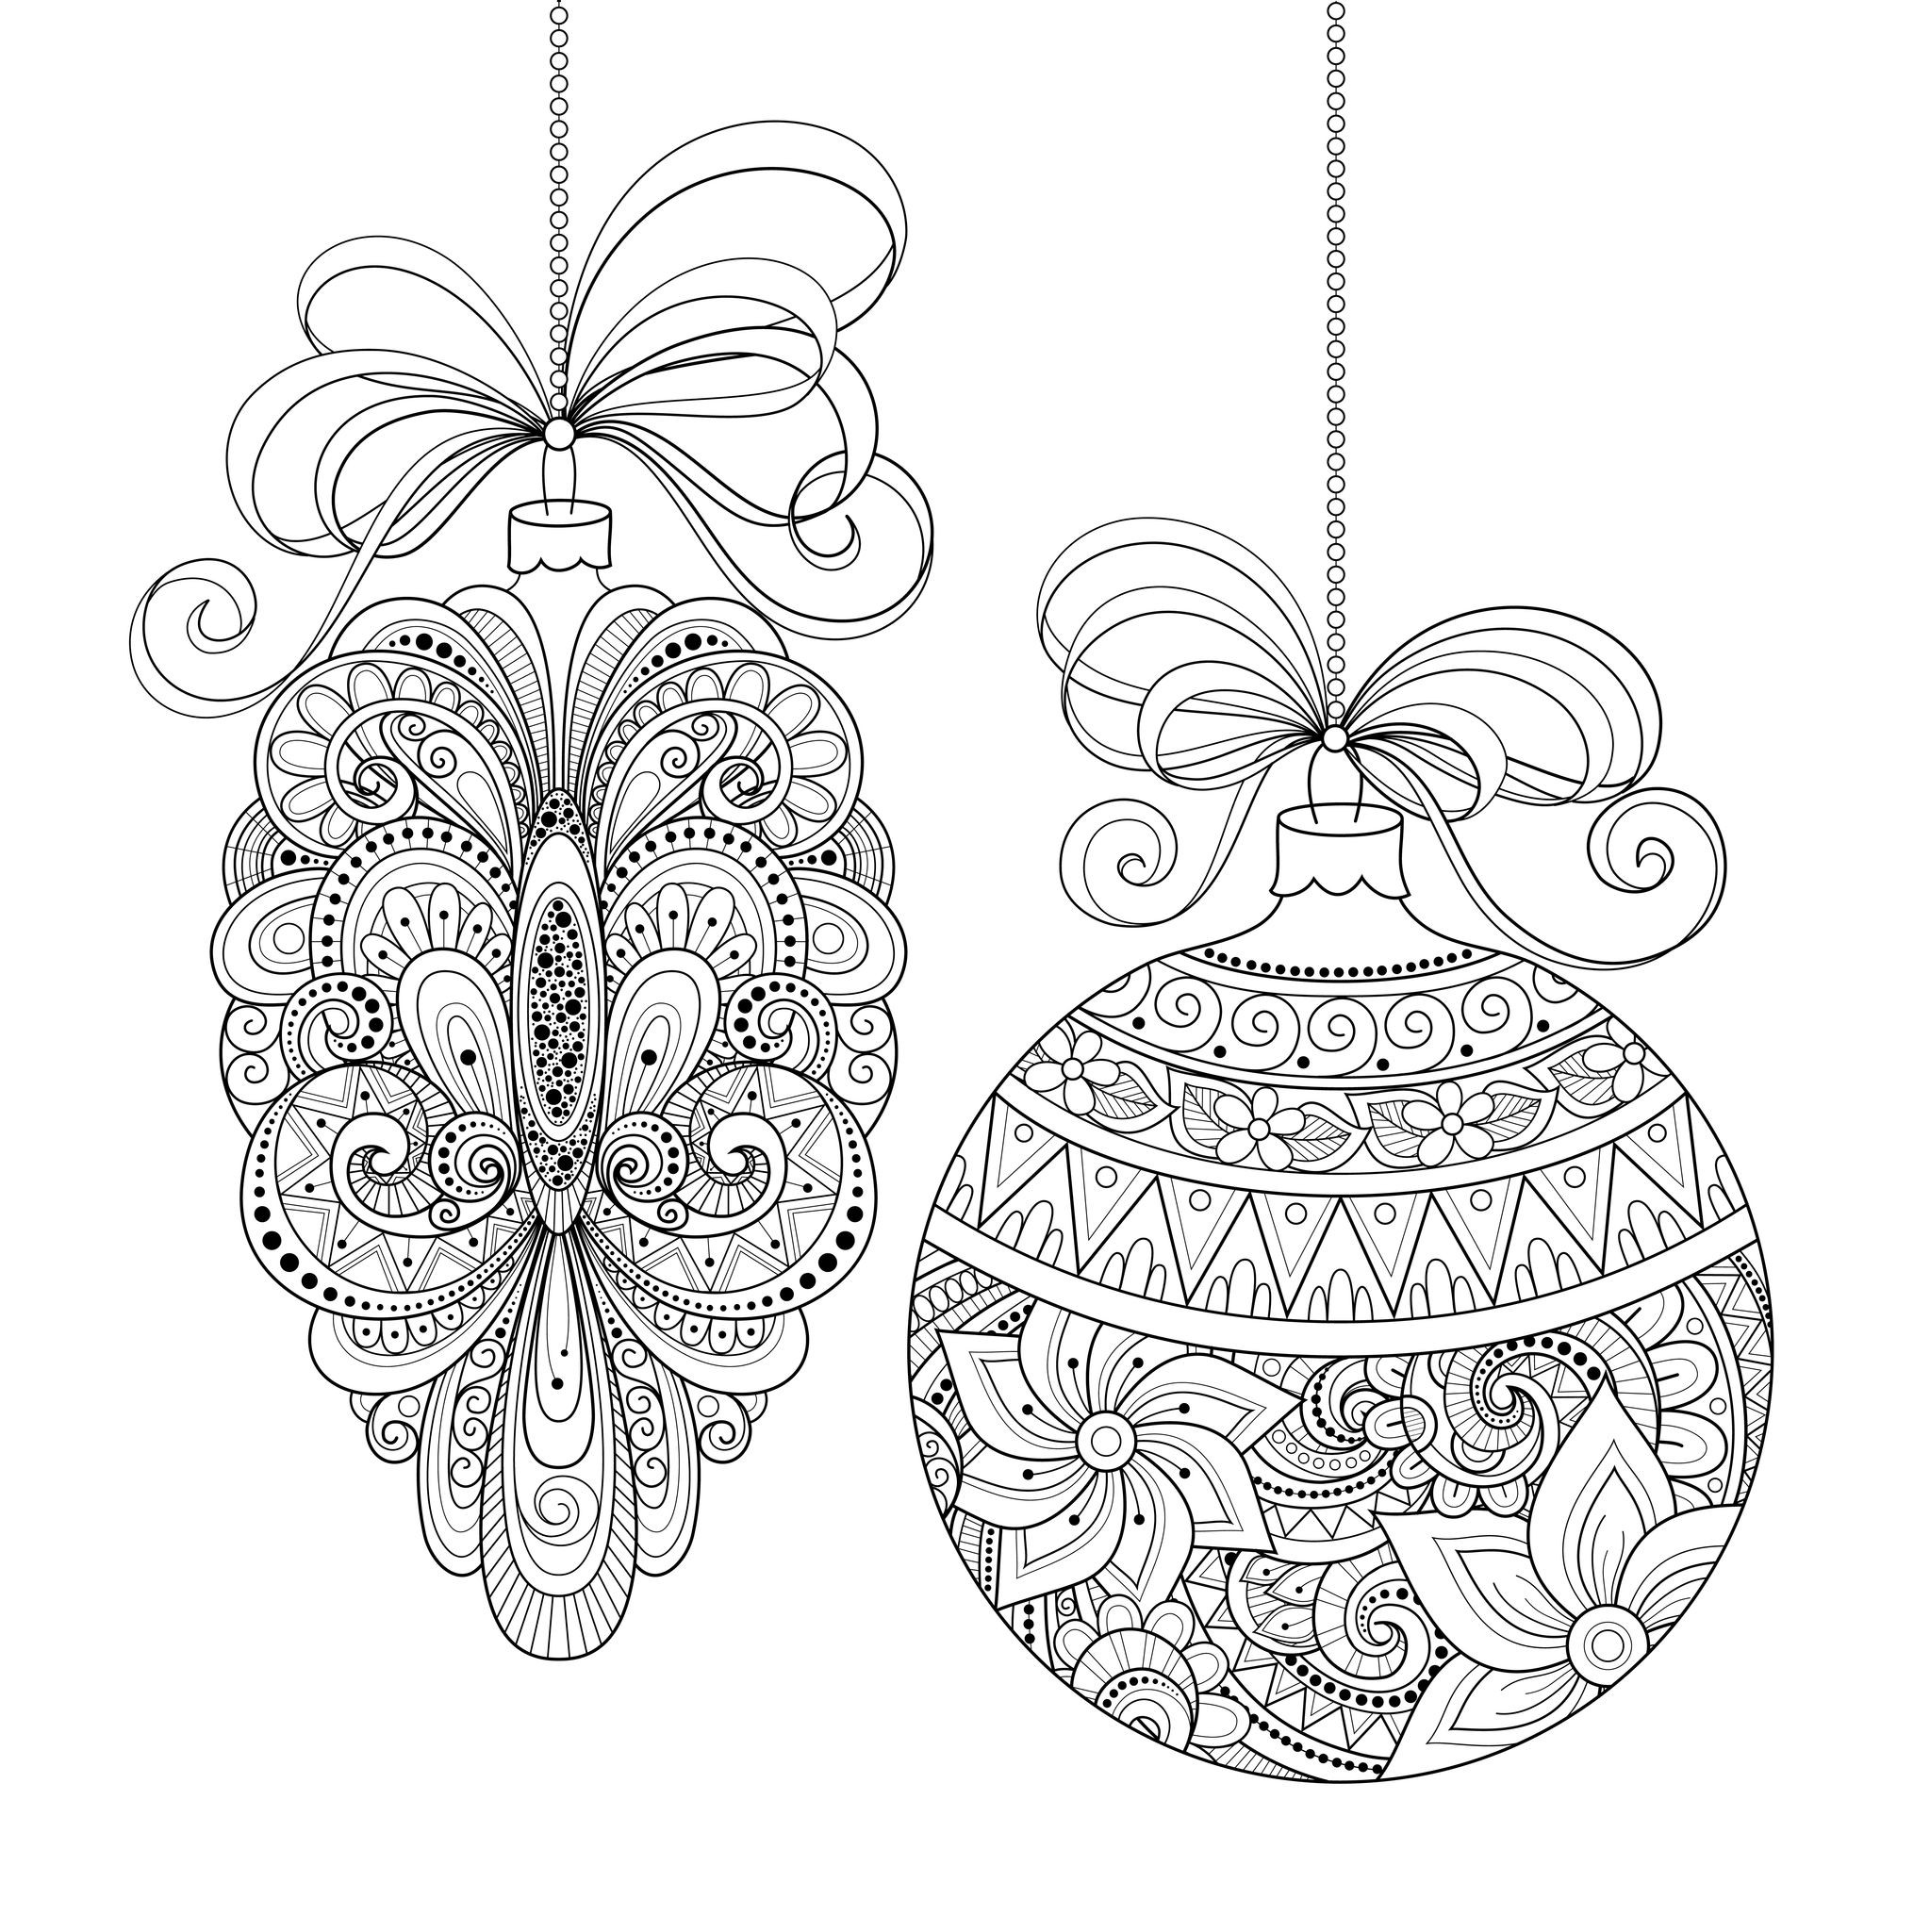 Fun Coloring Pages For Adults
 Christmas Coloring Pages for Adults Best Coloring Pages